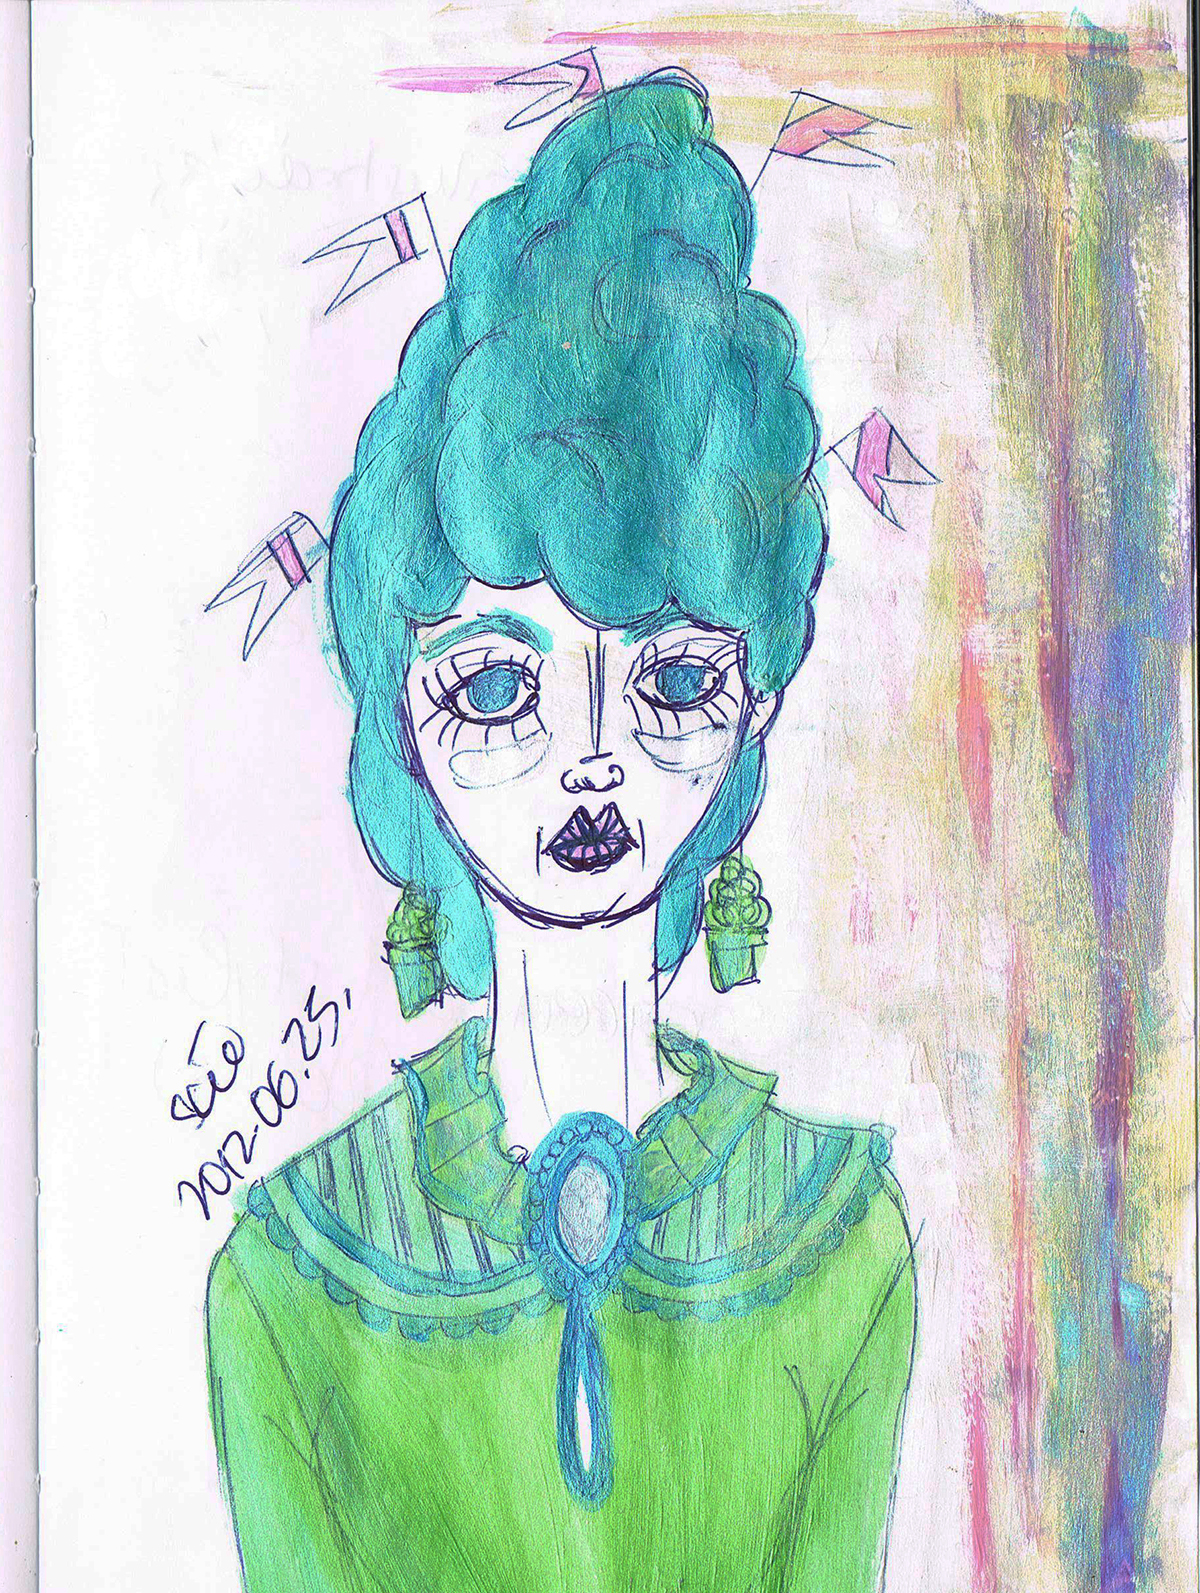 art watercolor girls portraits portrait characters Character delicate naif girly sketchy handmade concept